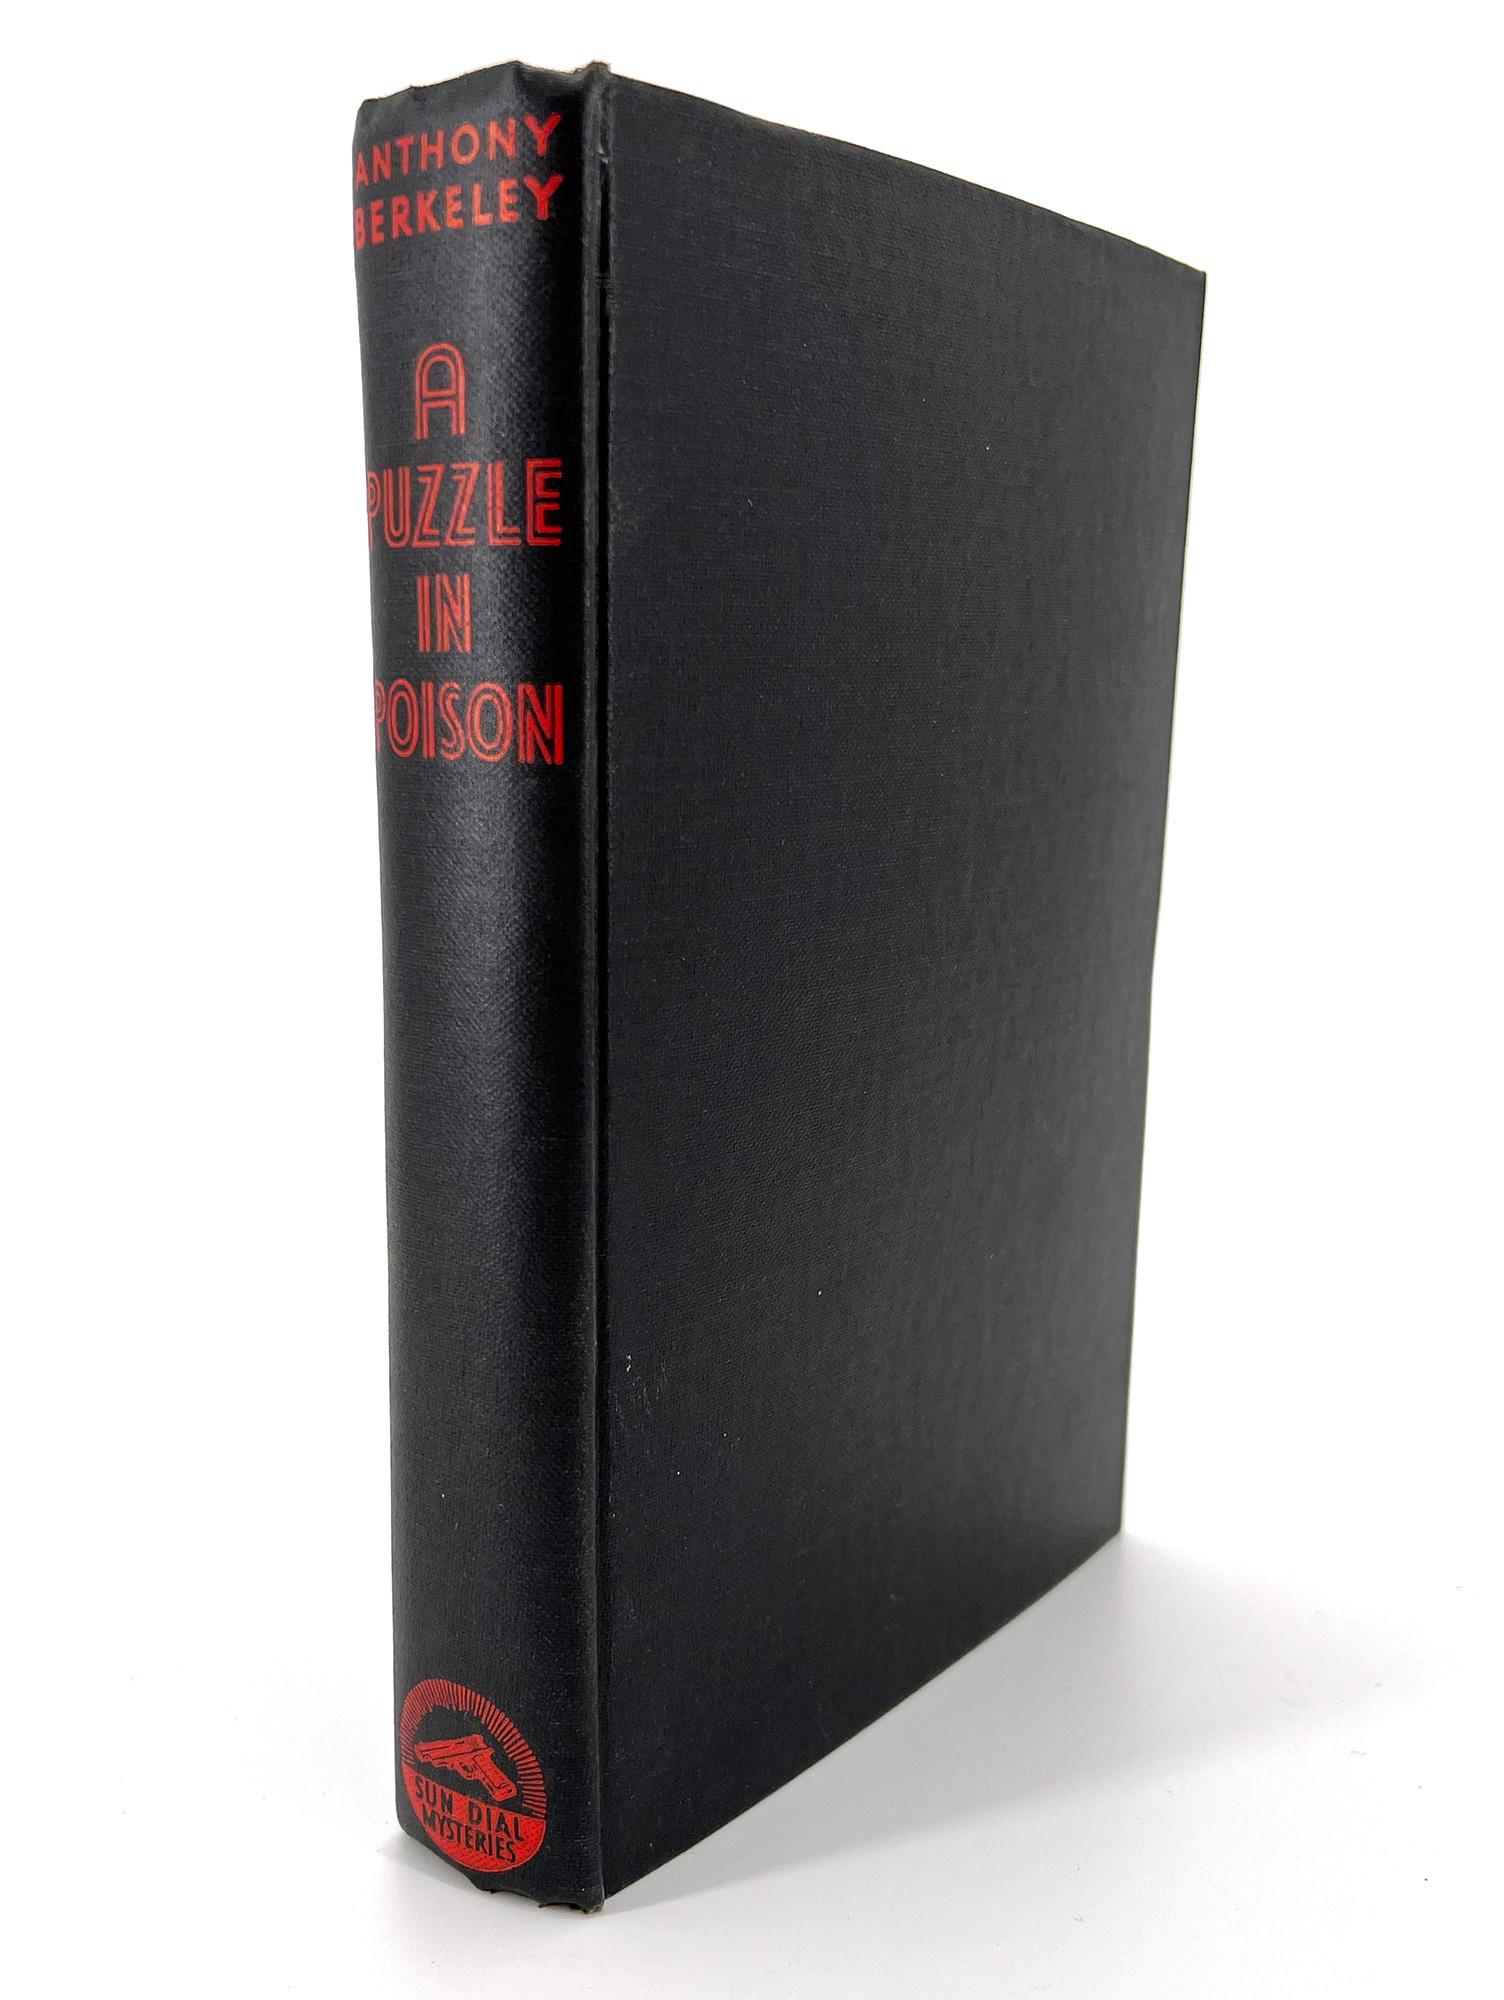 A classic of mystery literature by one of the Masters, in a very rare intact dust jacket.

Berkeley, Anthony. A Puzzle in Poison. 
New York: The Sun Dial Press, Inc., 1939. Second American Edition. 
8vo, 7 7/8 x 5 1/2 in. (198 x 140 mm); pp. x +